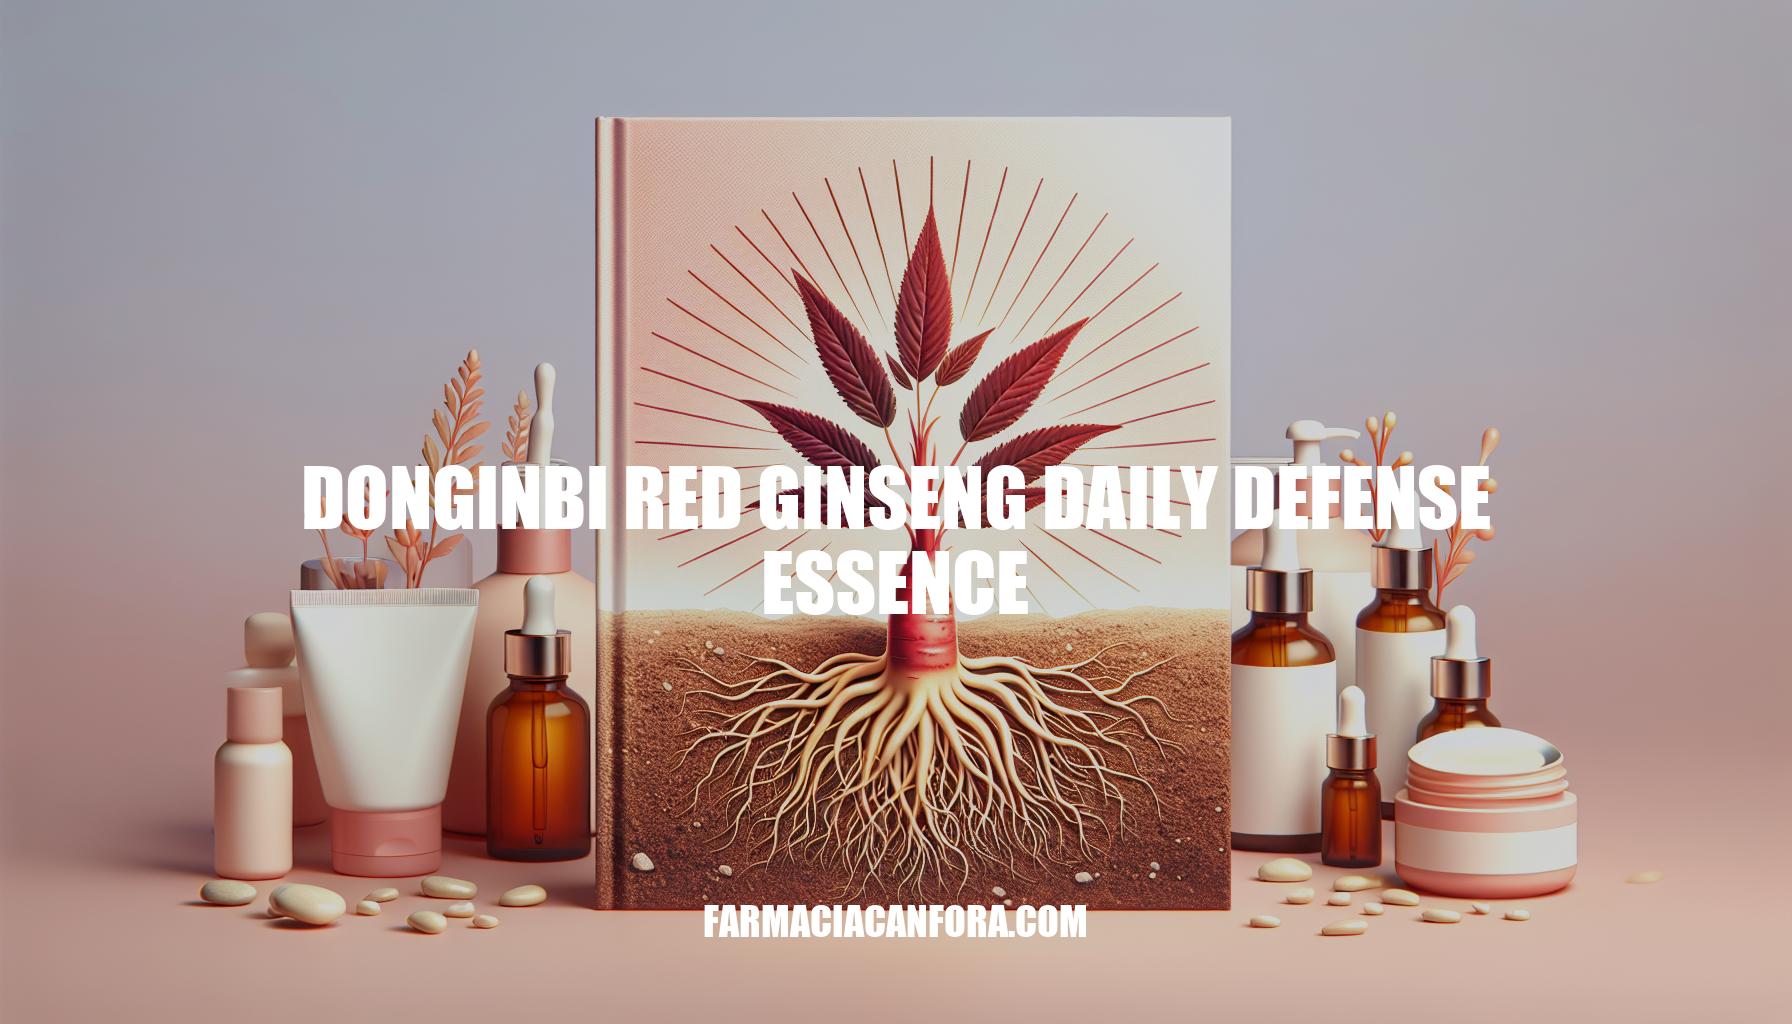 Ultimate Guide to Donginbi Red Ginseng Daily Defense Essence